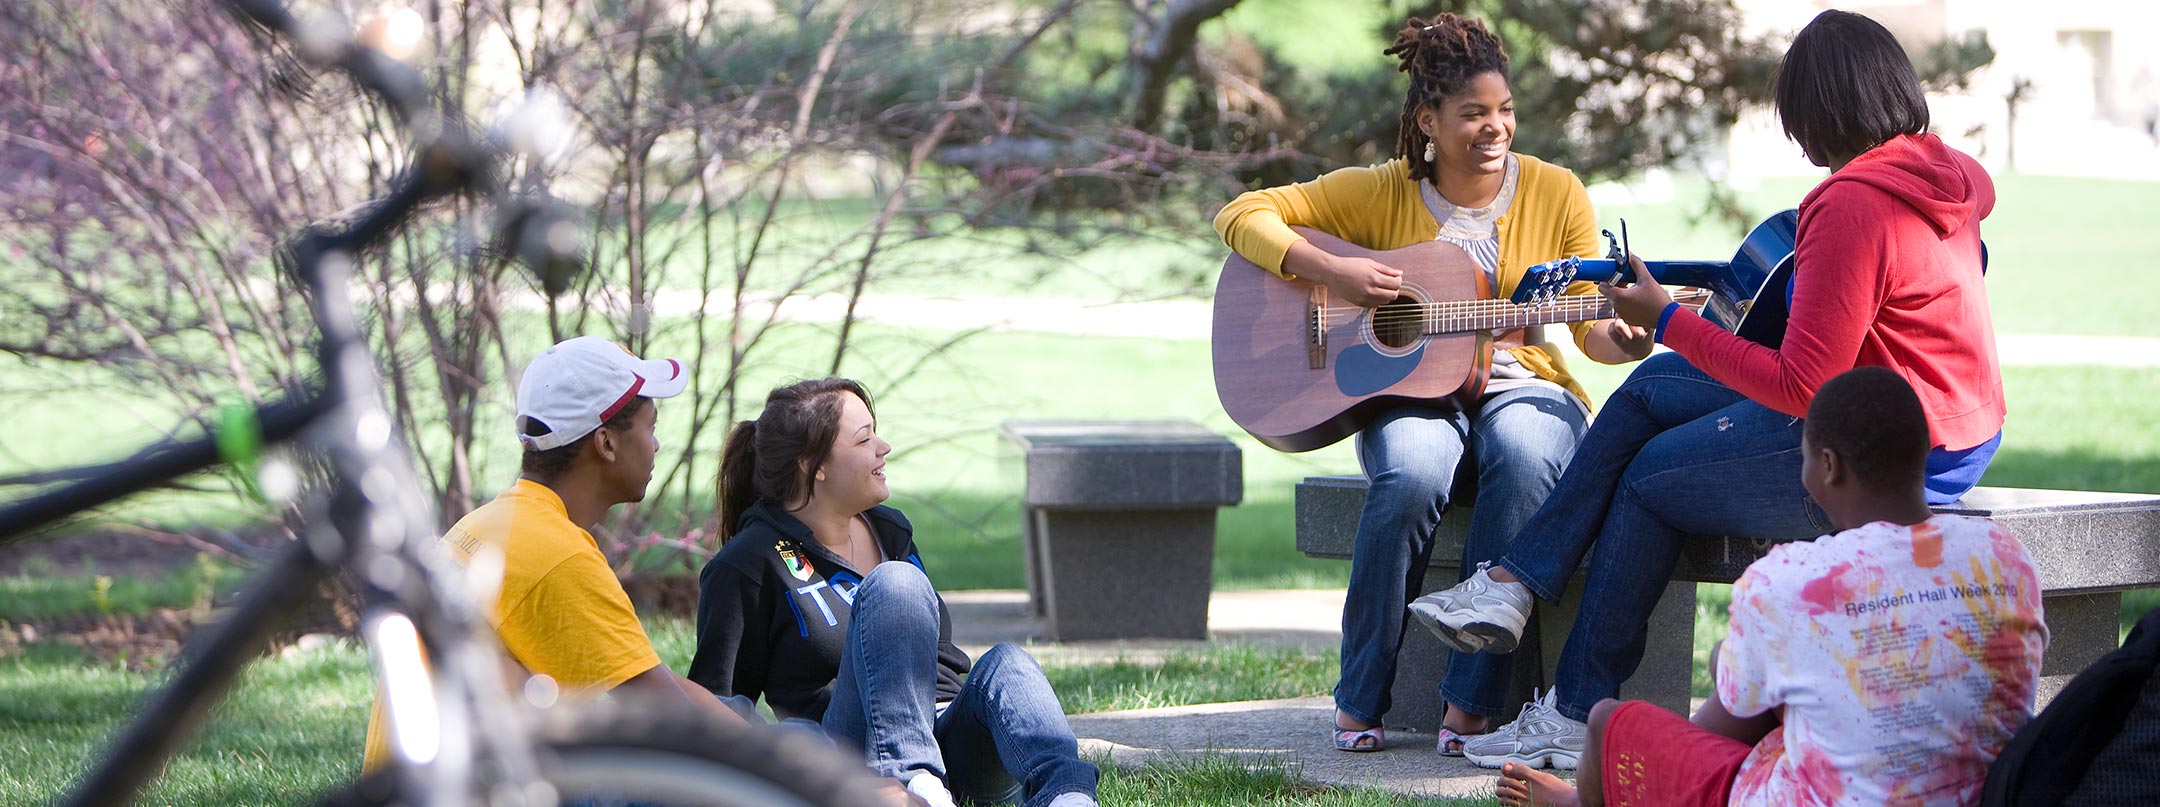 A student plays the guitar outside while peers listen.